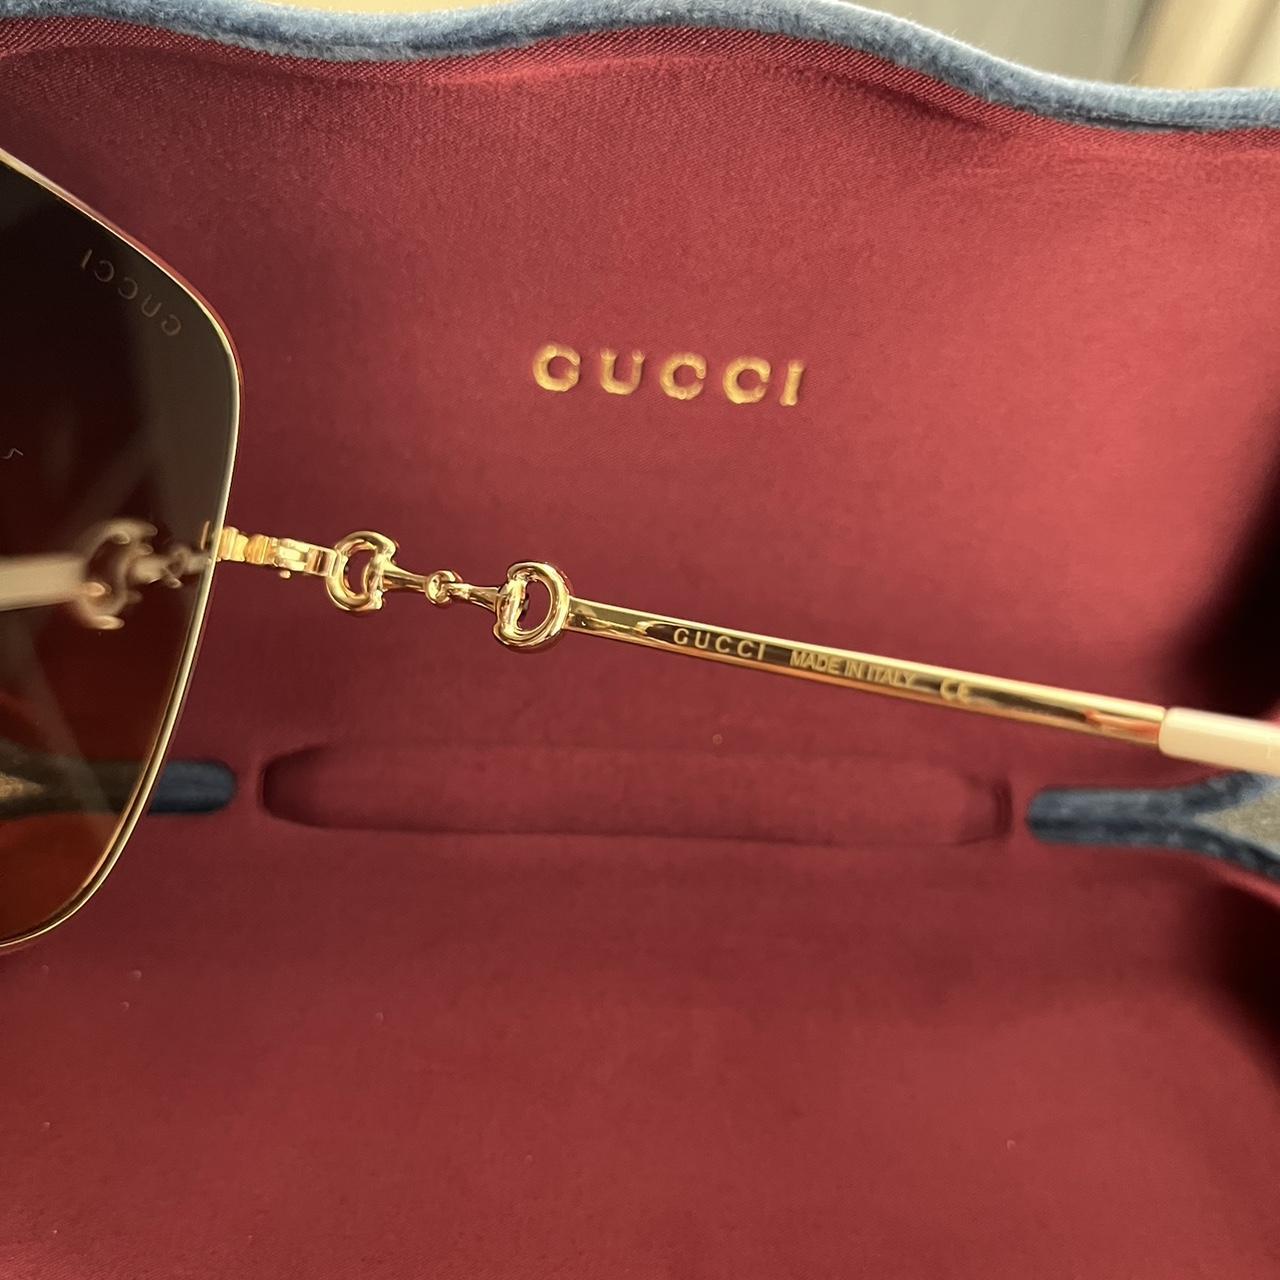 GUCCI G0879s Sunglasses I have only... - Depop